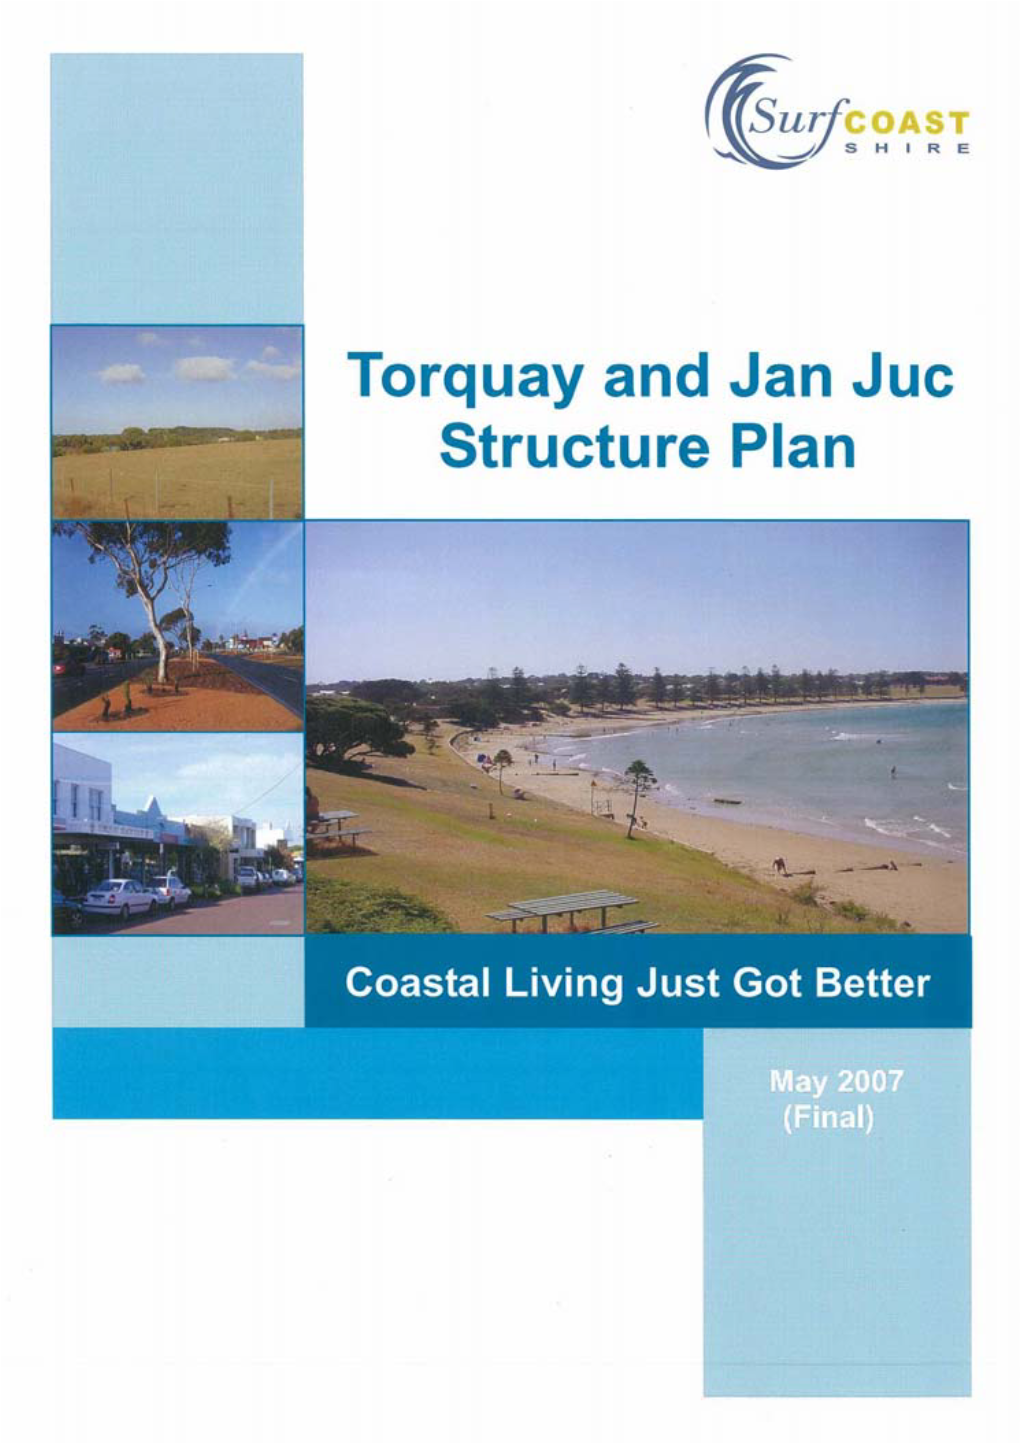 Torquay and Jan Juc Structure Plan Is a Reference Document of the Surf Coast Planning Scheme